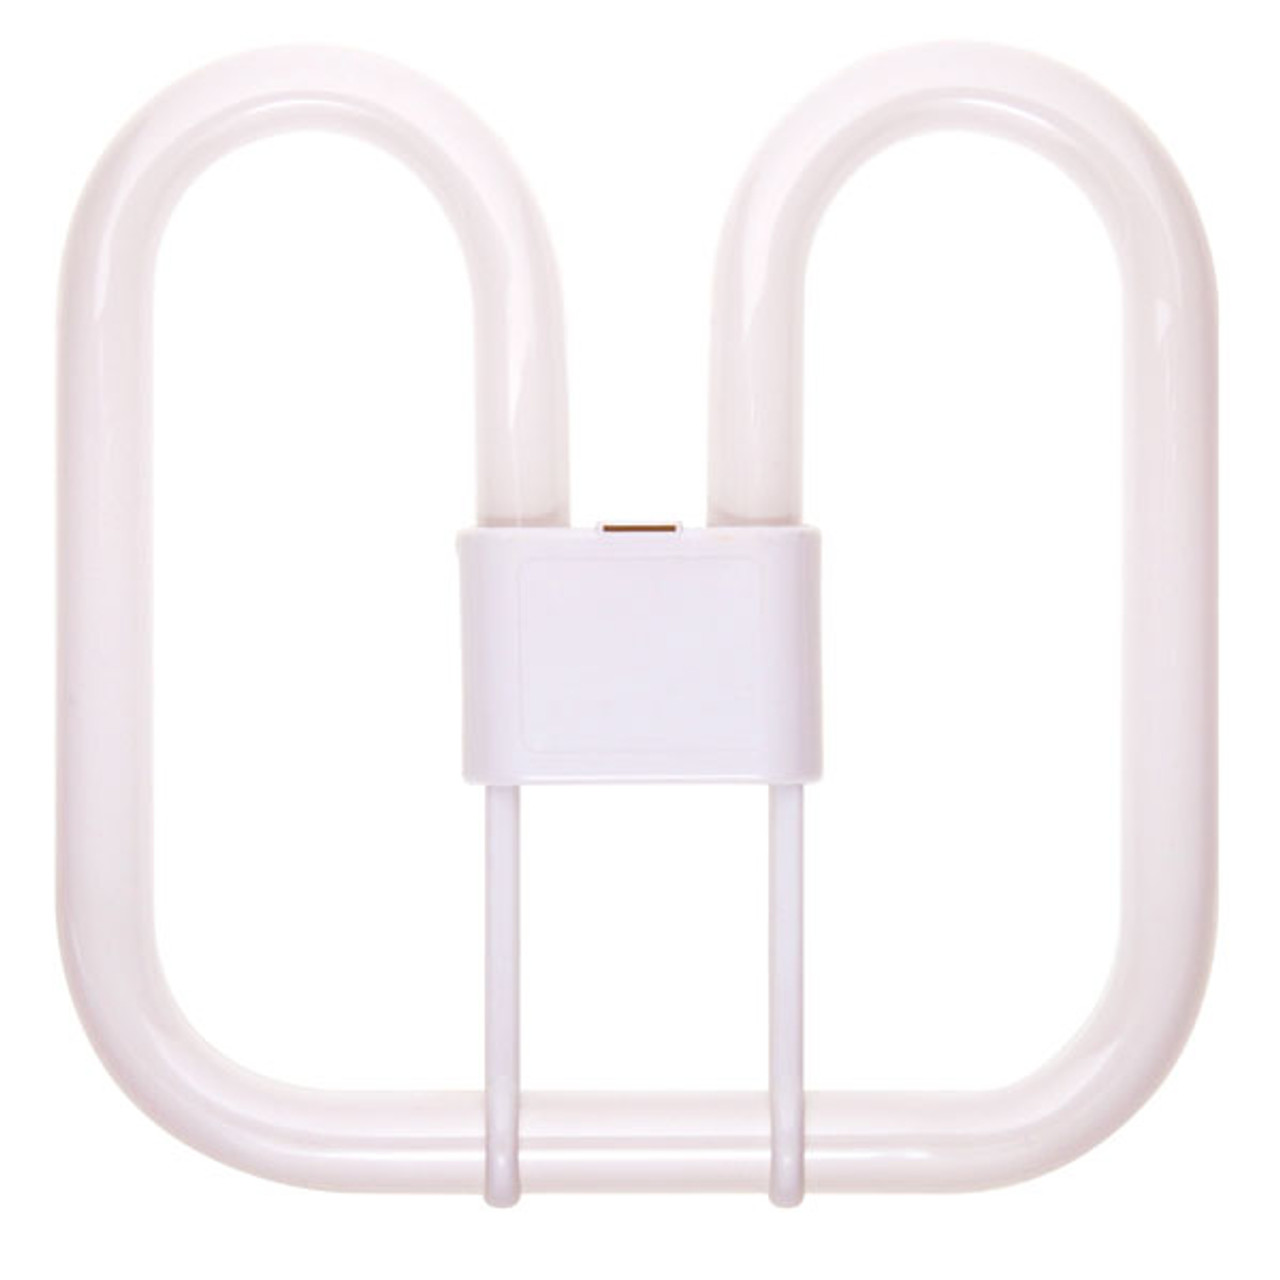 BELL Square 38W 4 Pin 835 White